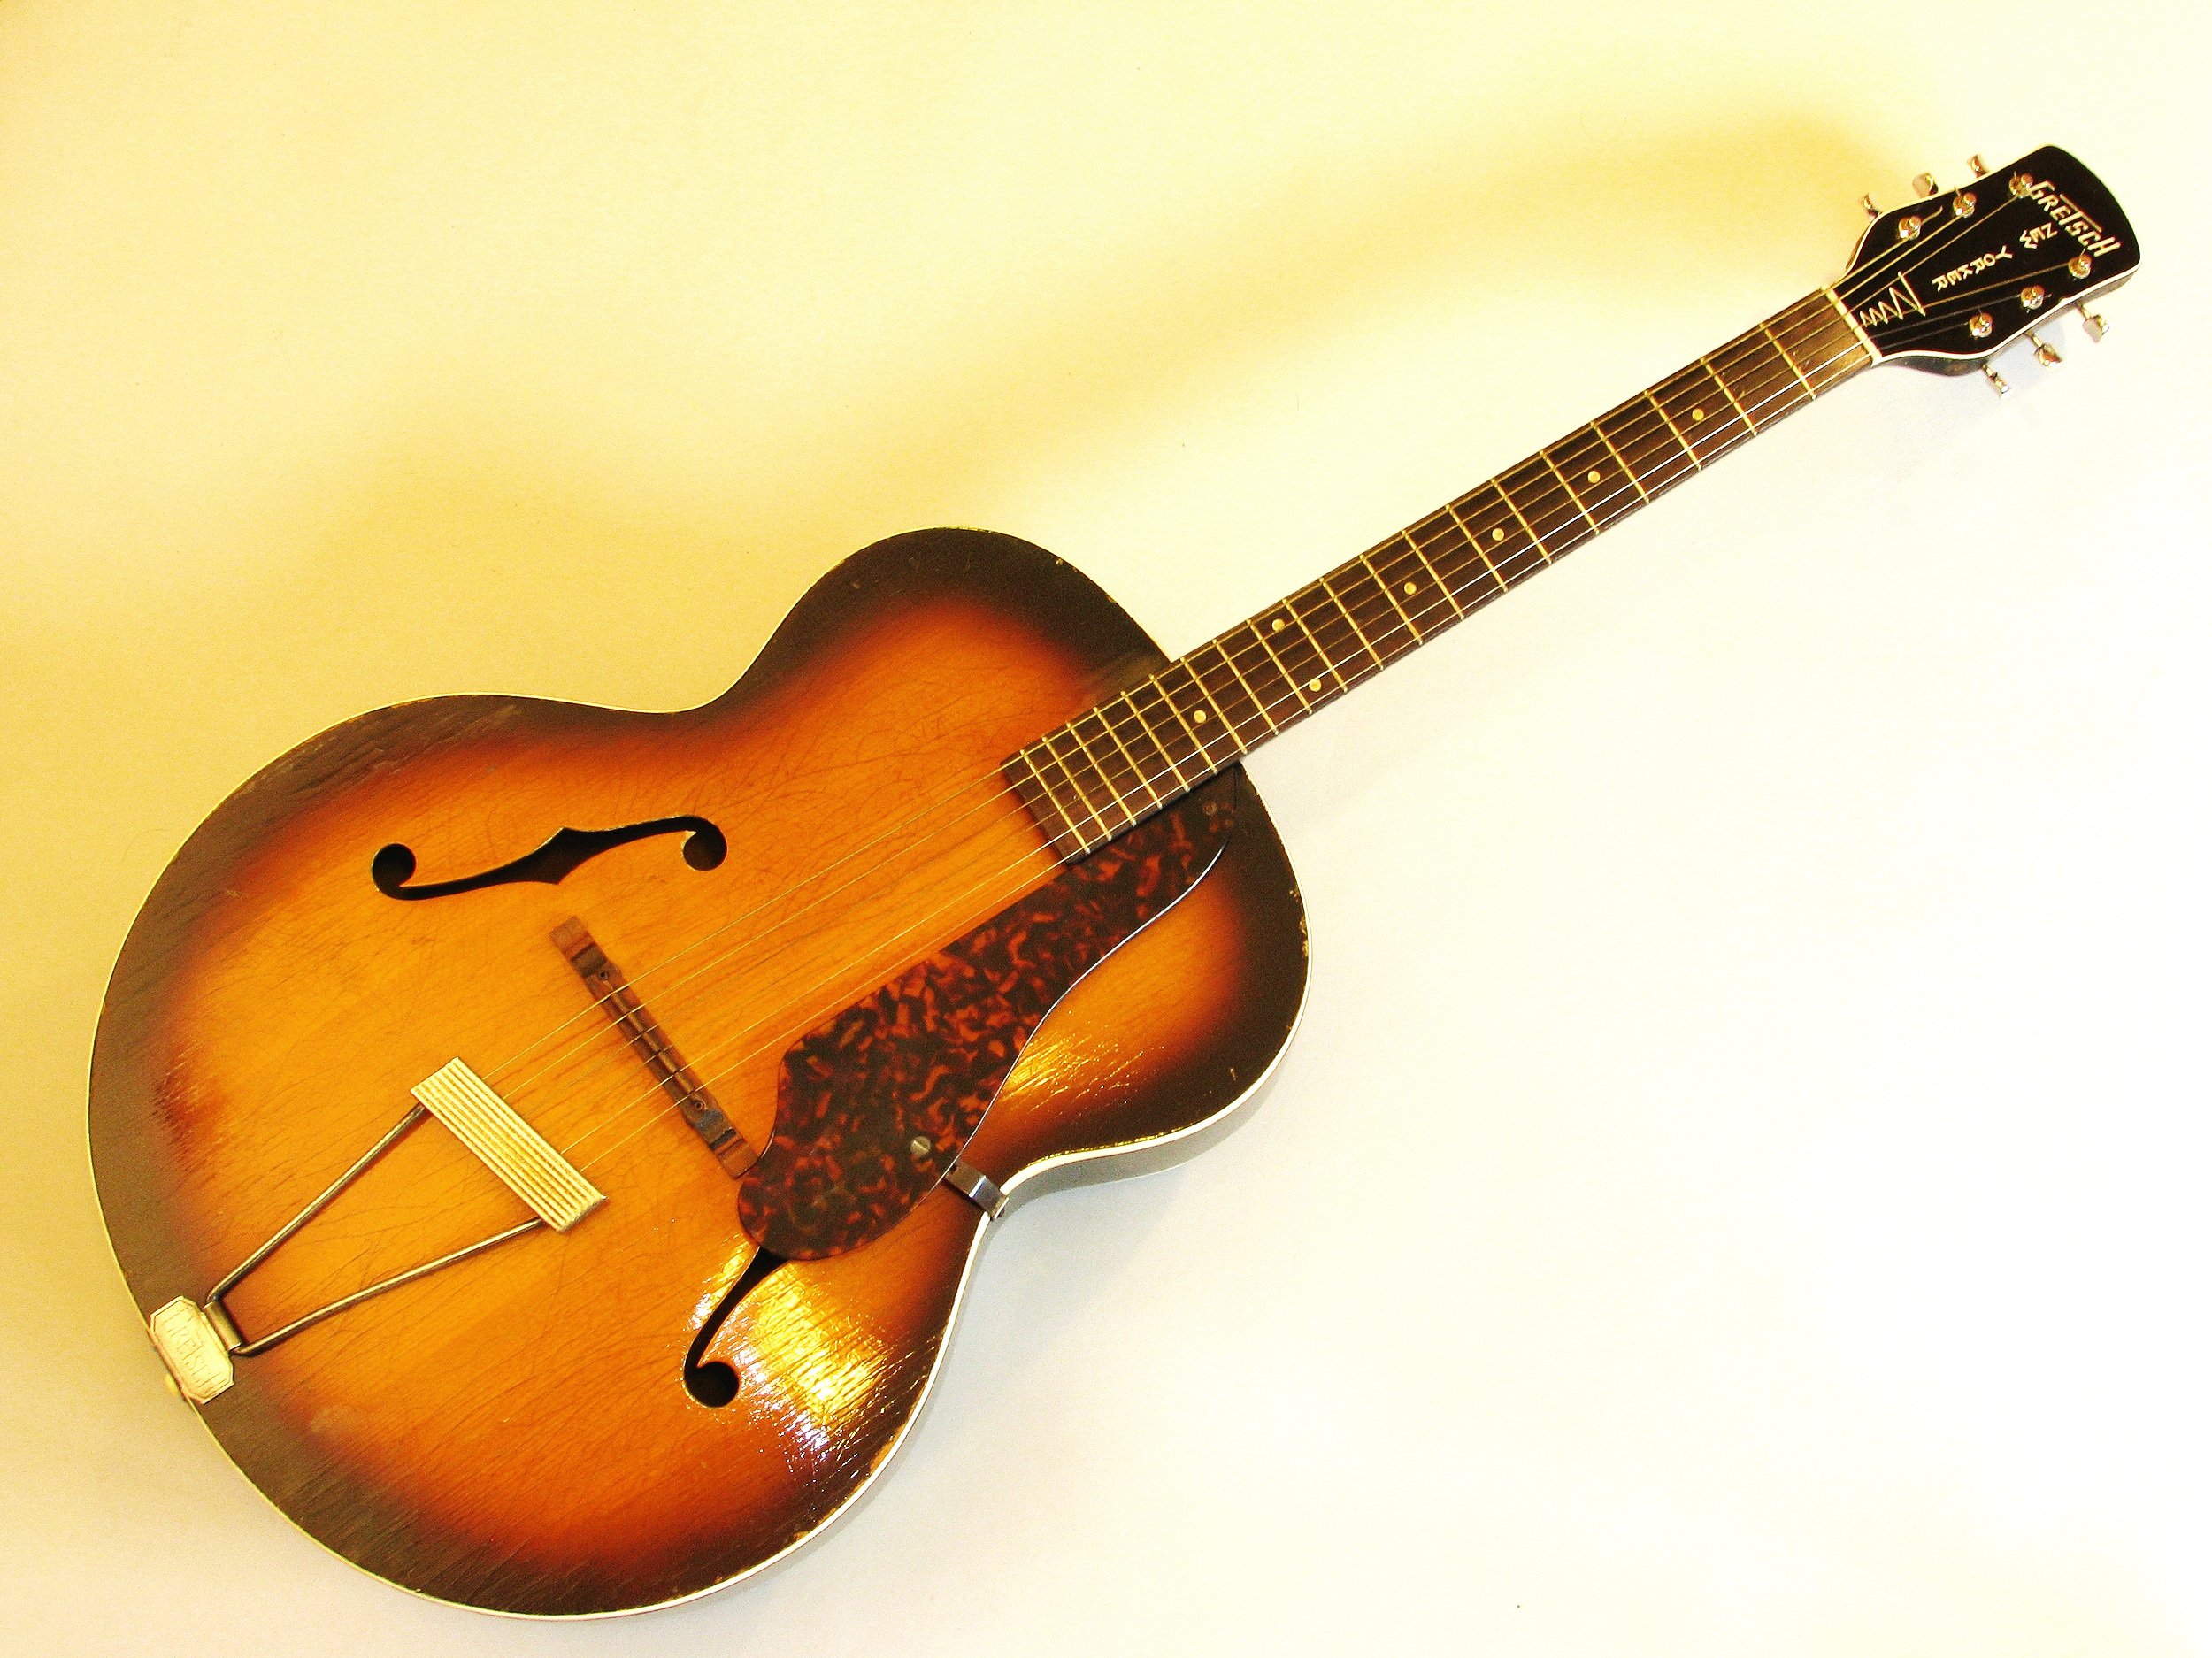 A Collectible Gretsch saved from the Grave